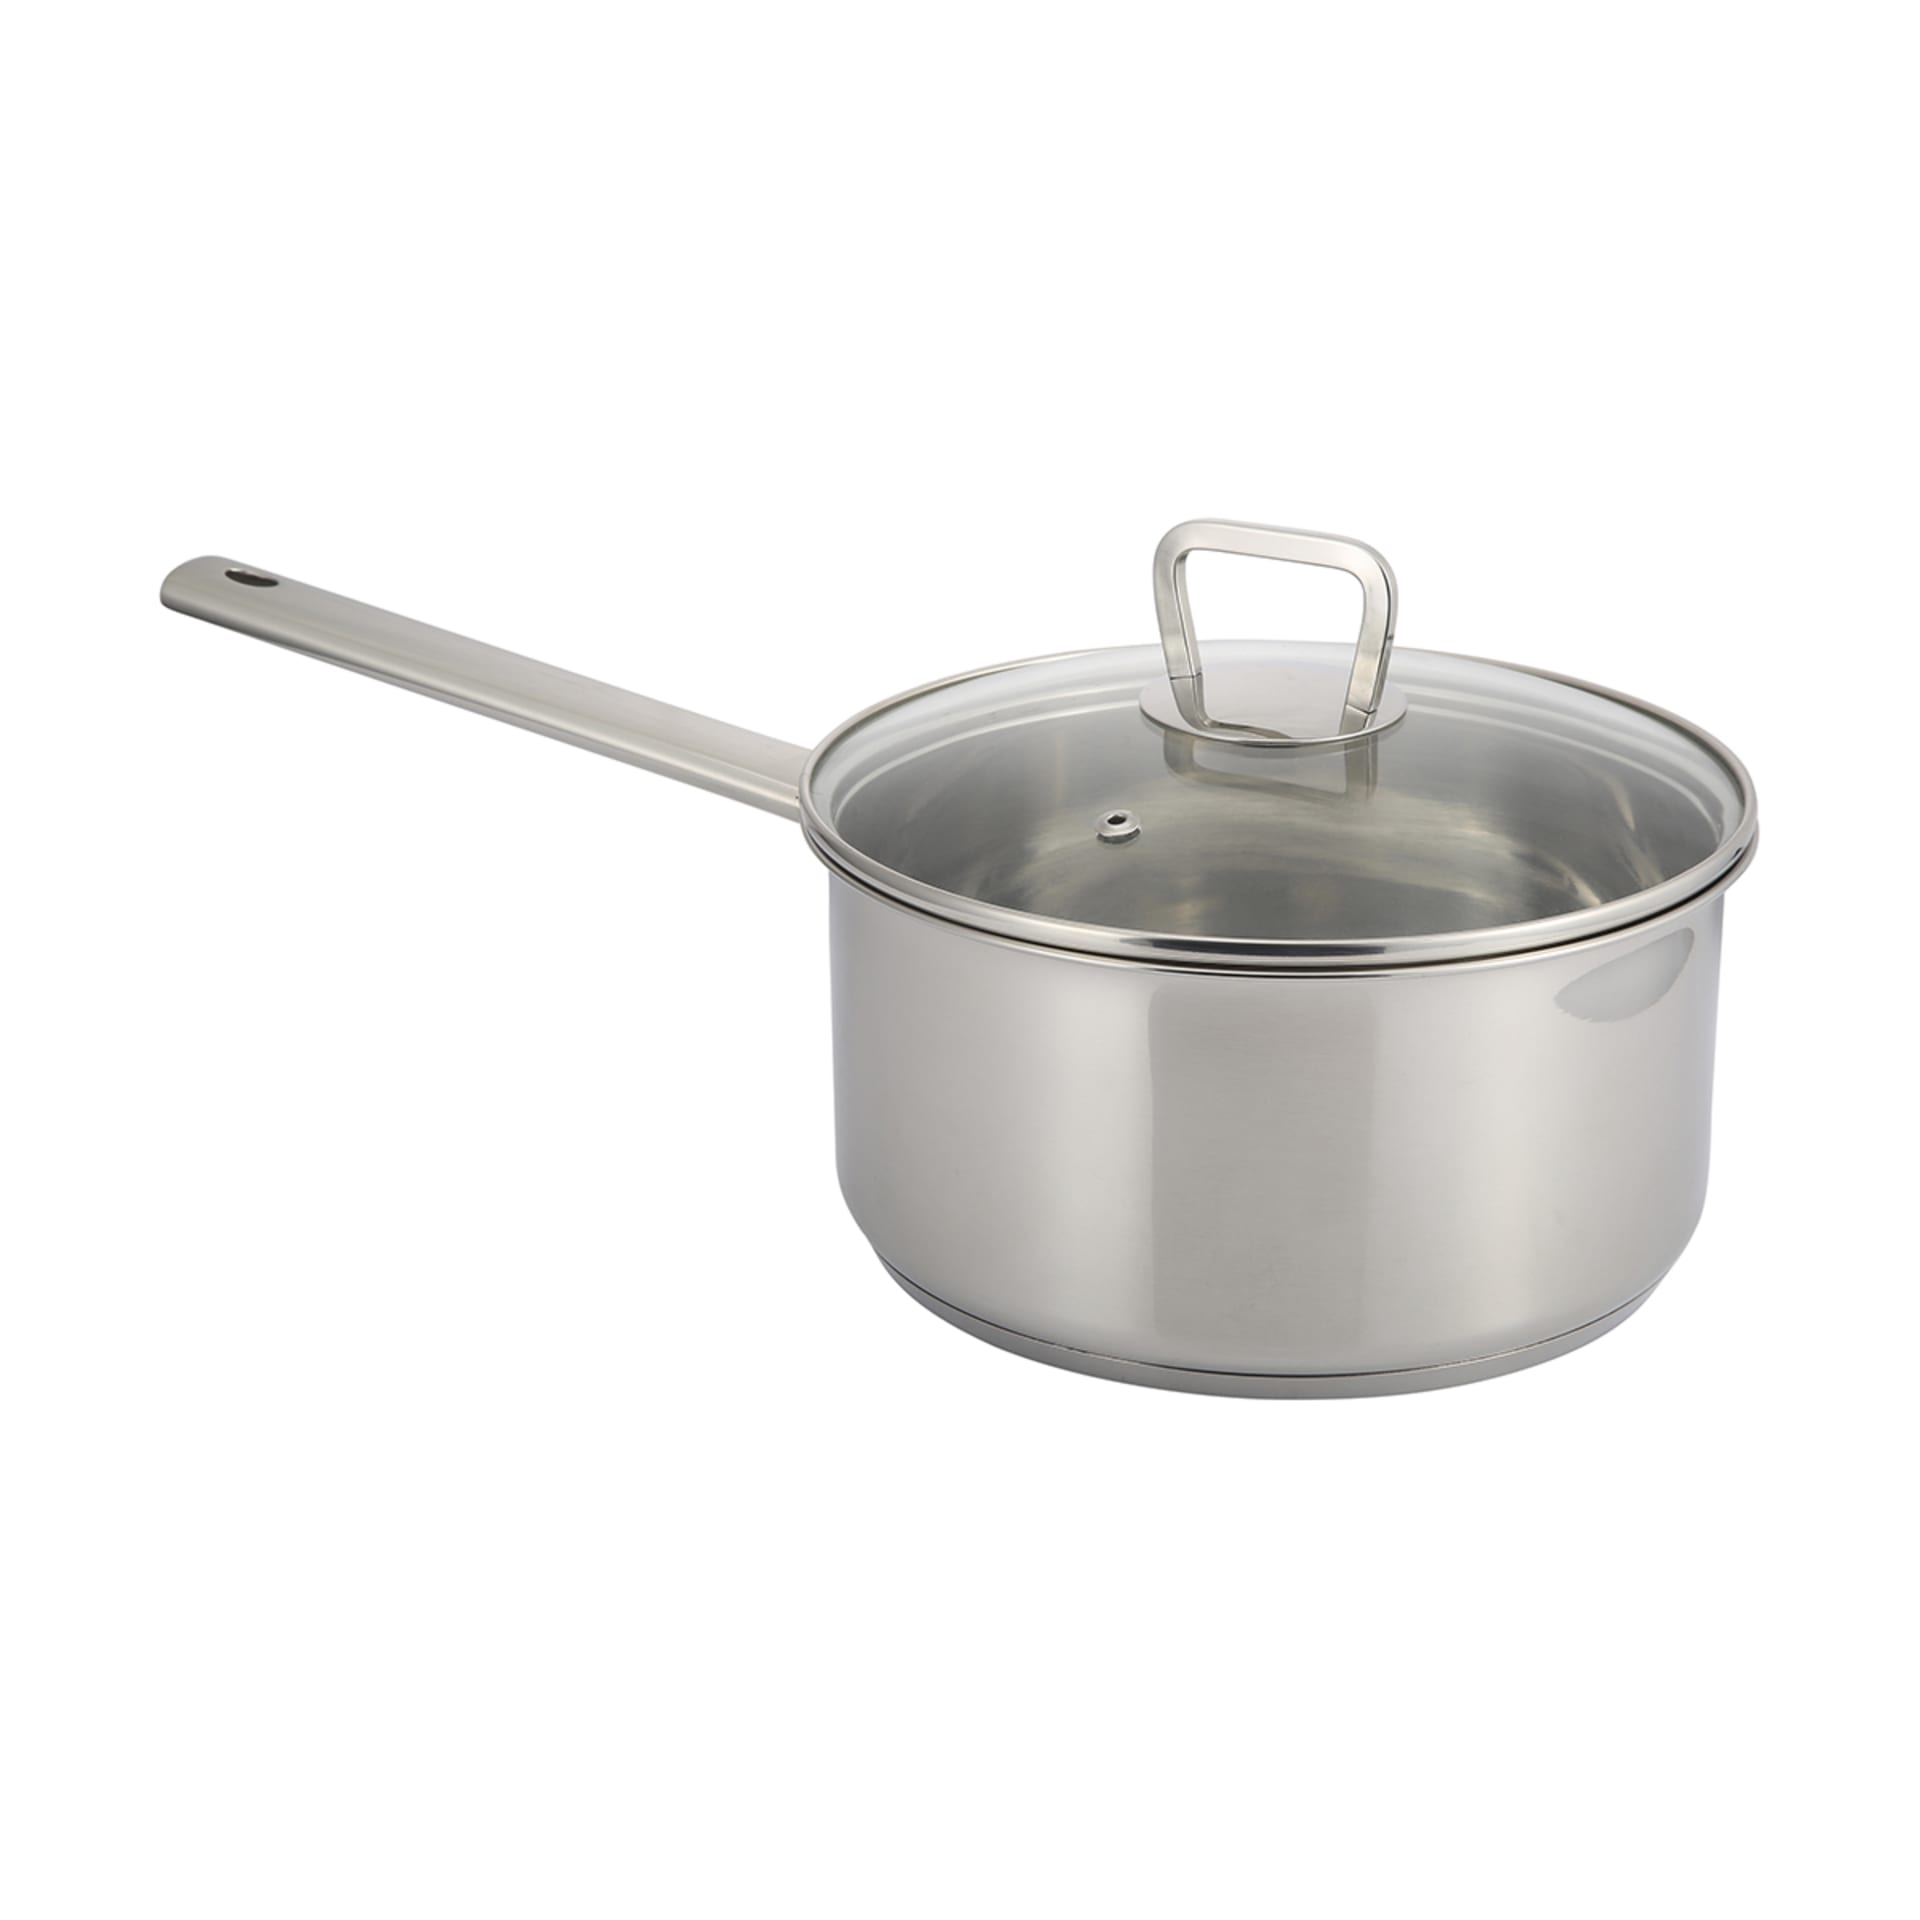 20cm Stainless Steel Saucepan with Aluminium Enscapsulated Base - Kmart